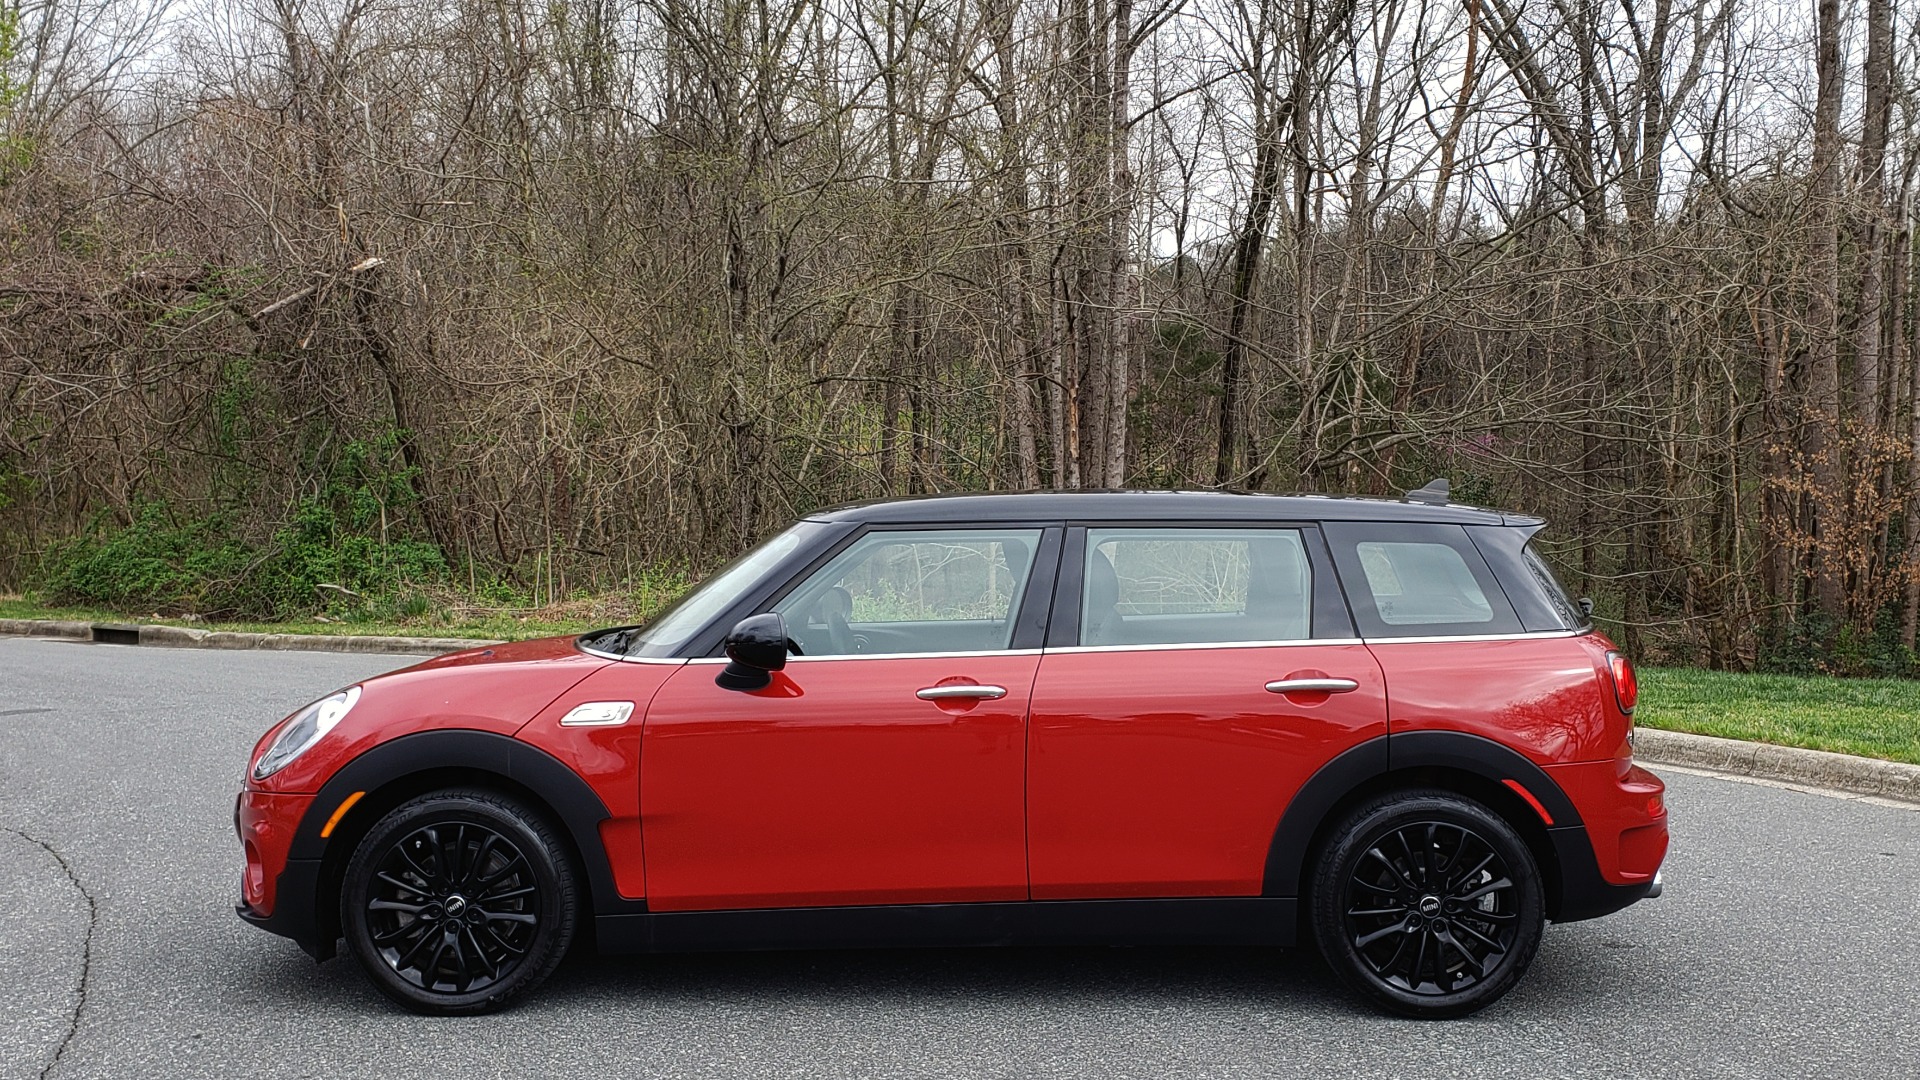 Used 2018 MINI CLUBMAN COOPER S / FWD / AUTO / TURBO 4-CYL / REARVIEW for sale Sold at Formula Imports in Charlotte NC 28227 3